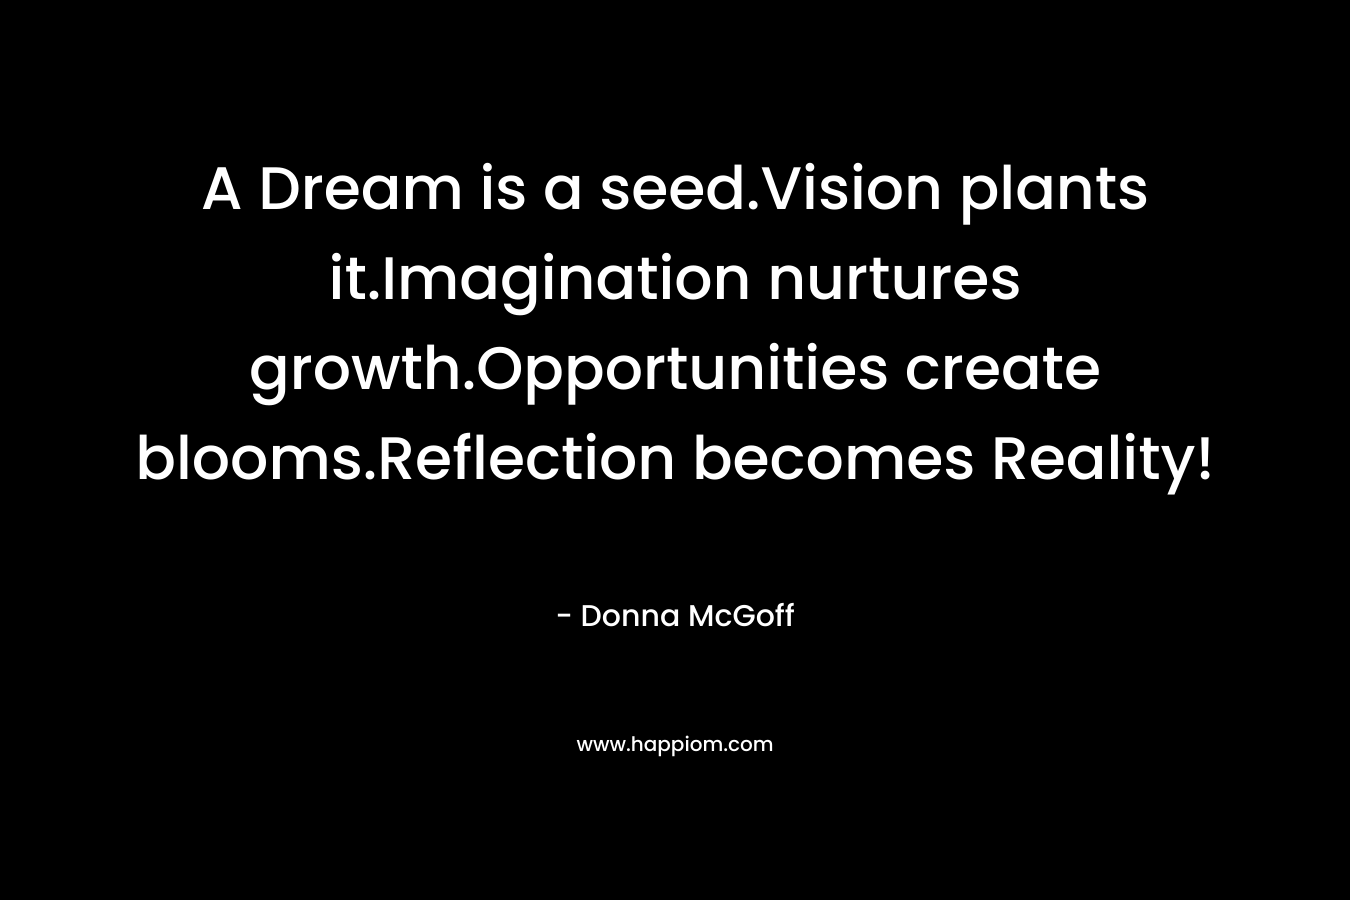 A Dream is a seed.Vision plants it.Imagination nurtures growth.Opportunities create blooms.Reflection becomes Reality! – Donna McGoff